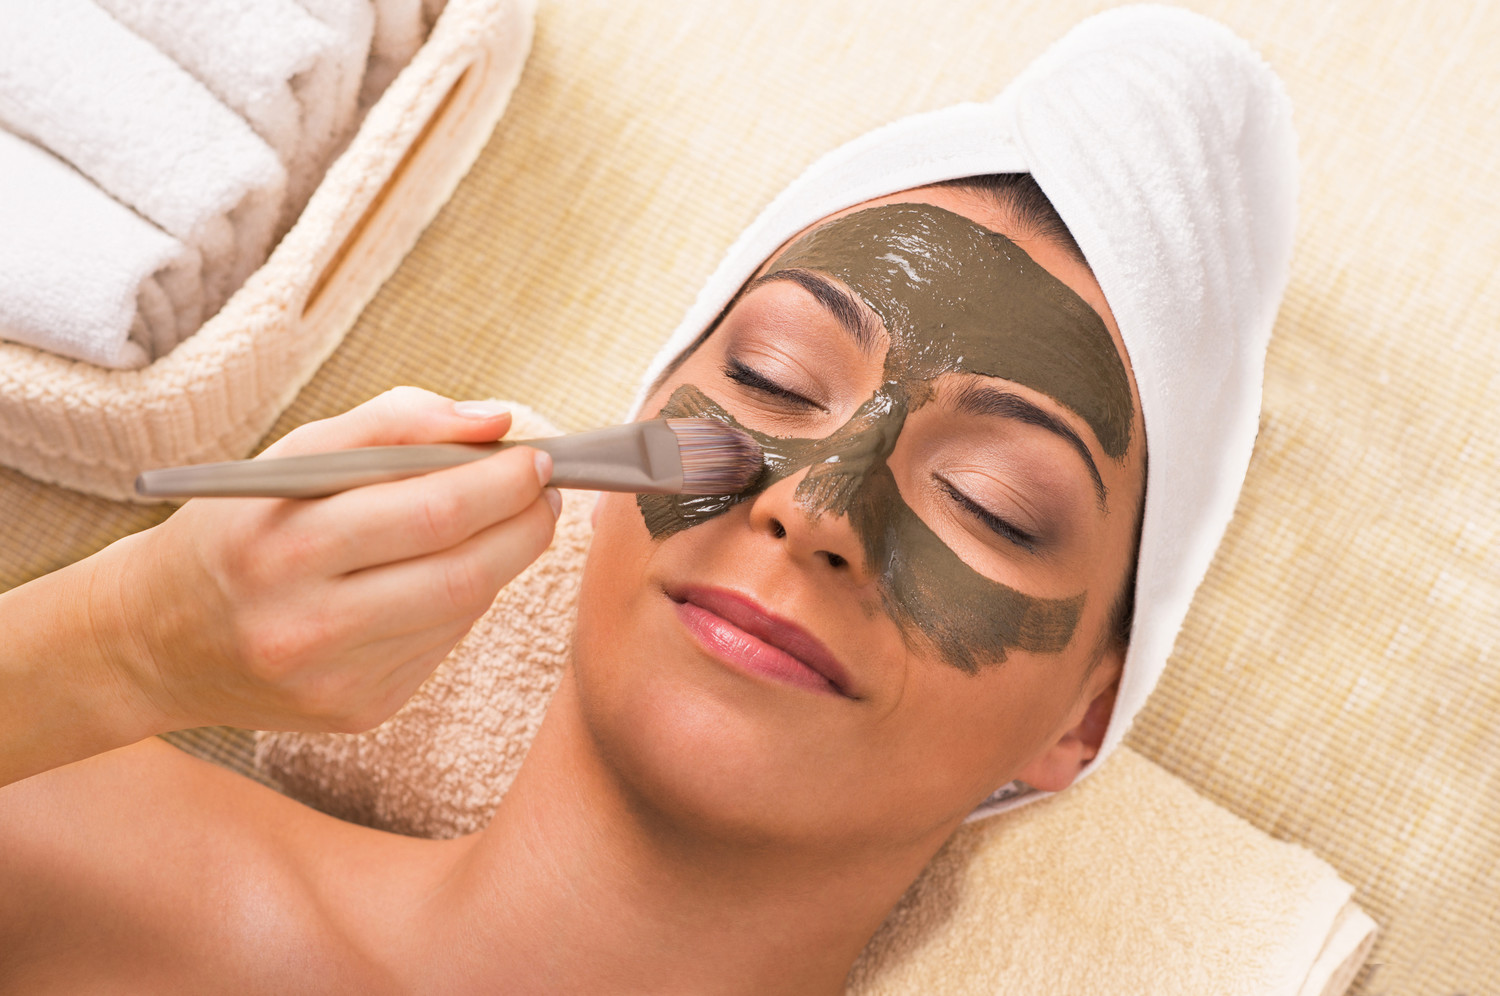 The spa will offer a variety of facials to meet customers’ needs.